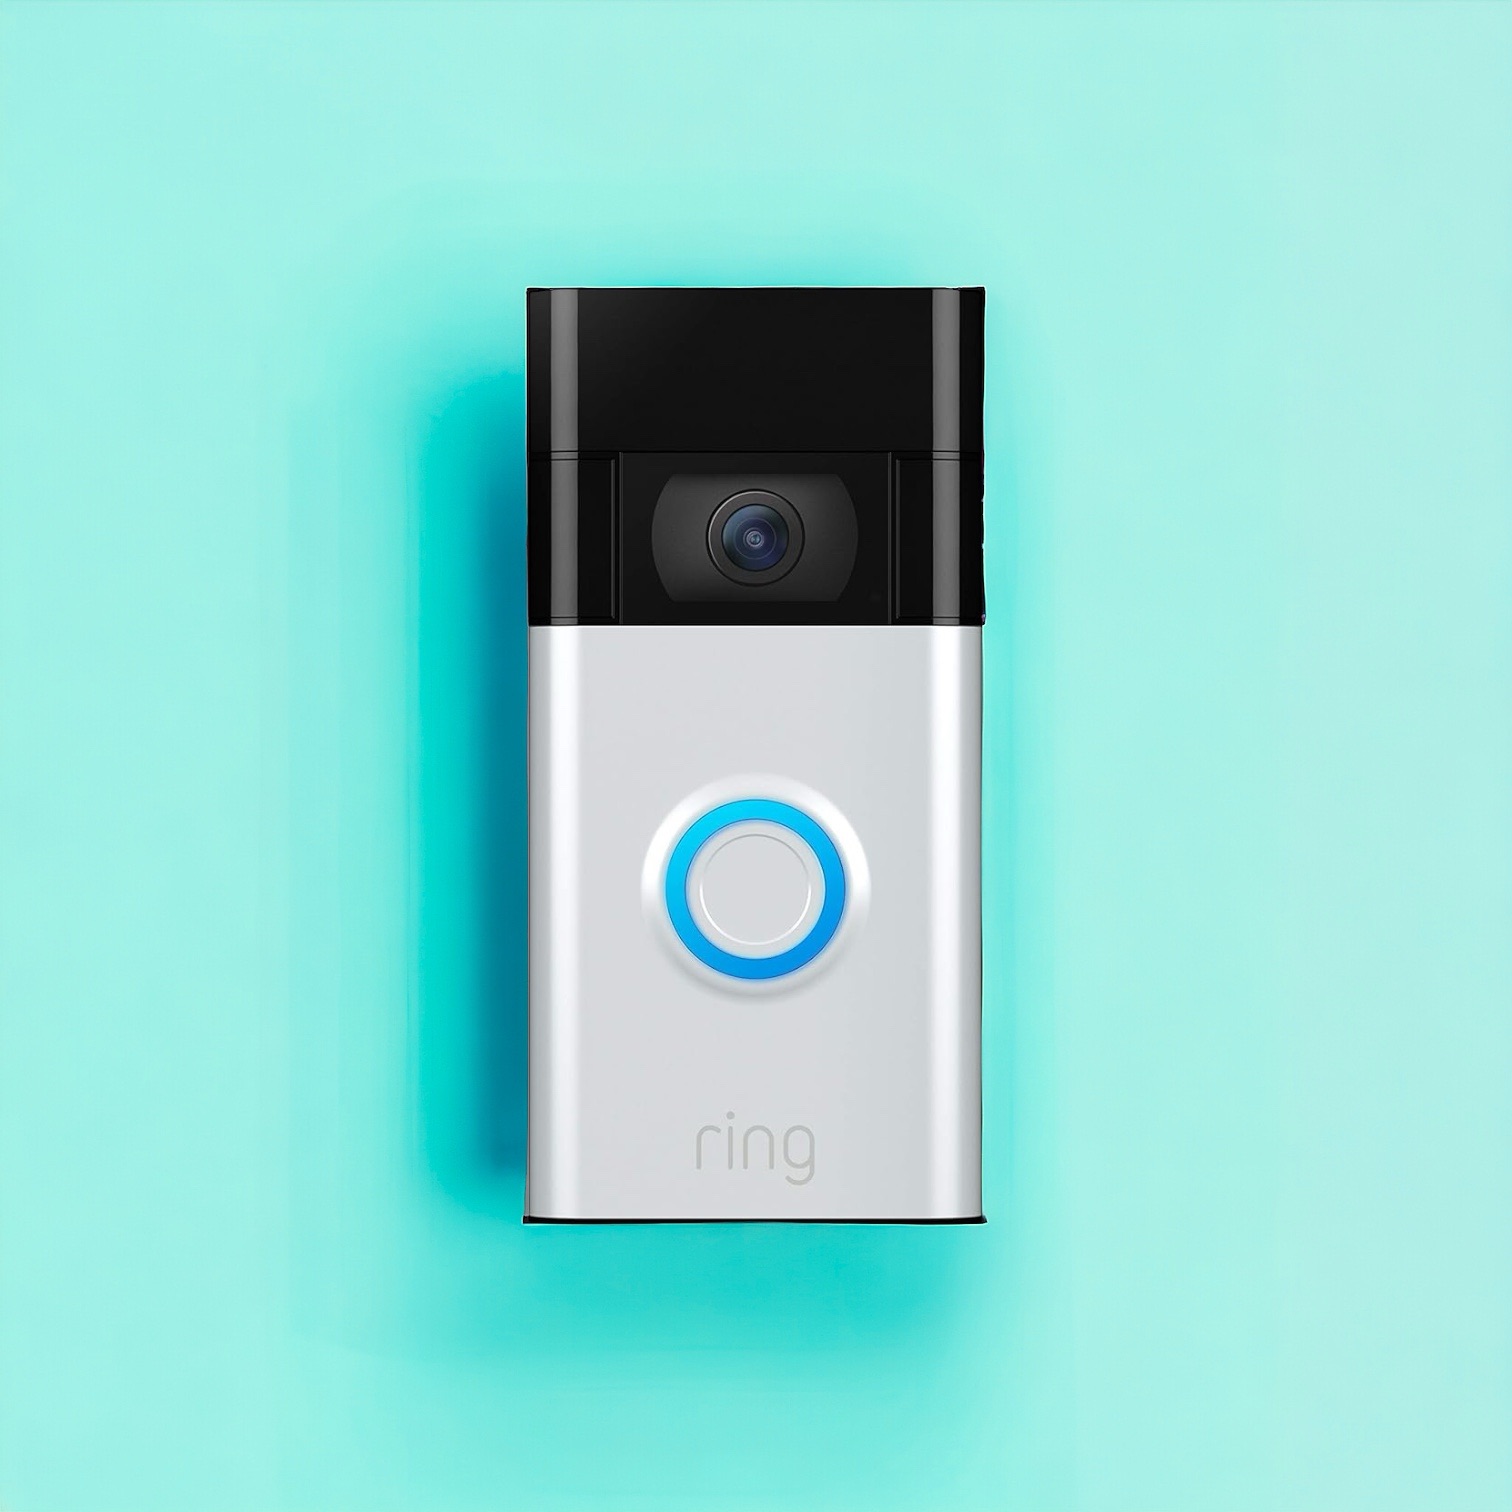 Ringing in the Future: How the Ring Video Doorbell Became My New Favorite Gadget